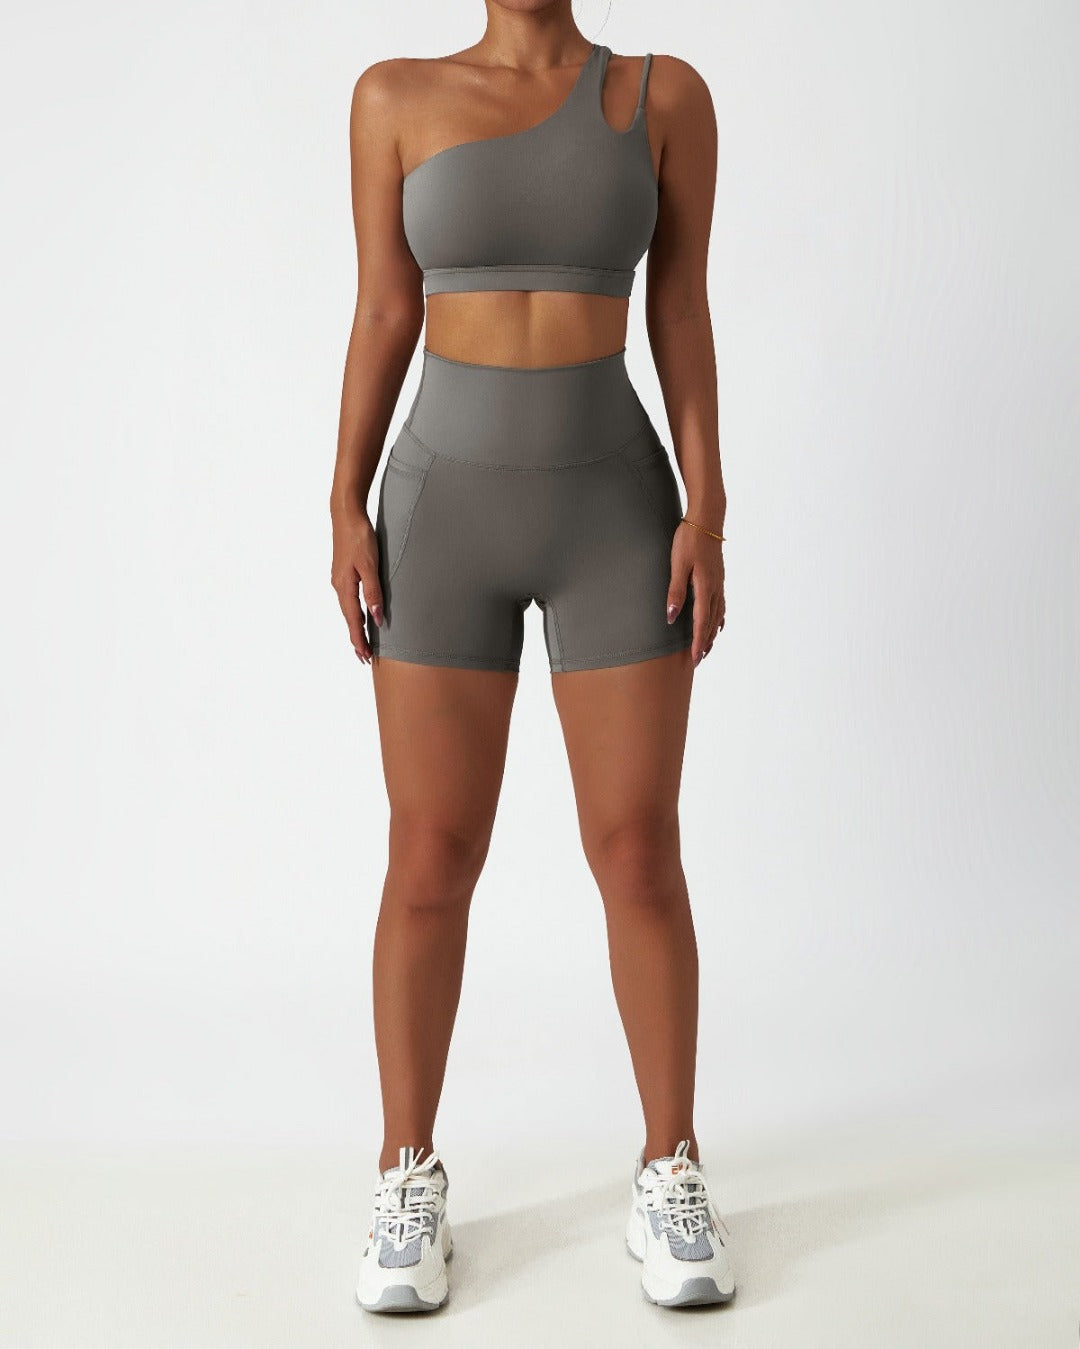 Cloud Grey Buttery Smooth Mini Shorts